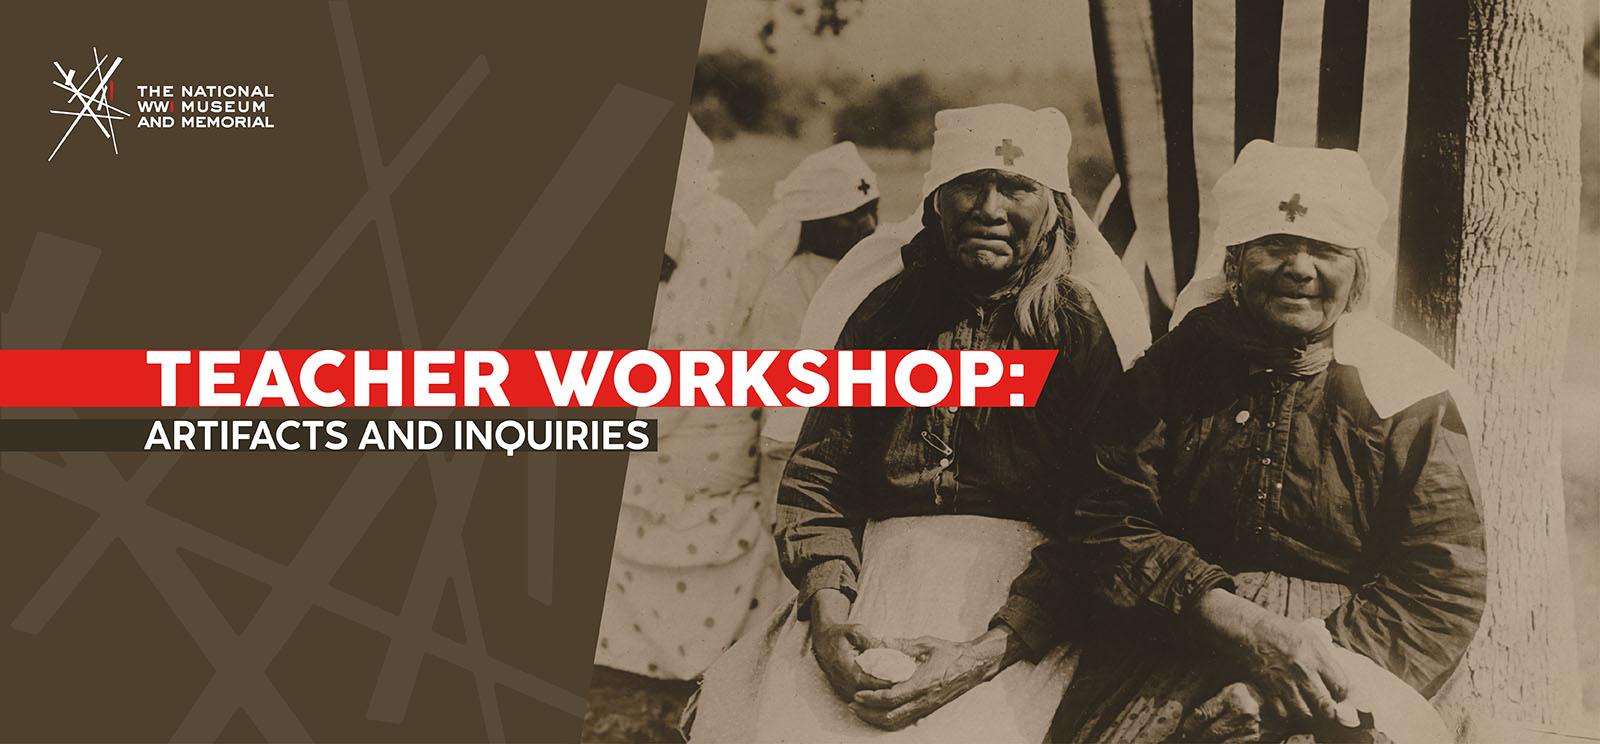 Image: Sepia photograph of two older Native American women dressed in Red Cross uniforms. Text: 'Teacher Workshop: Artifacts and Inquiries'